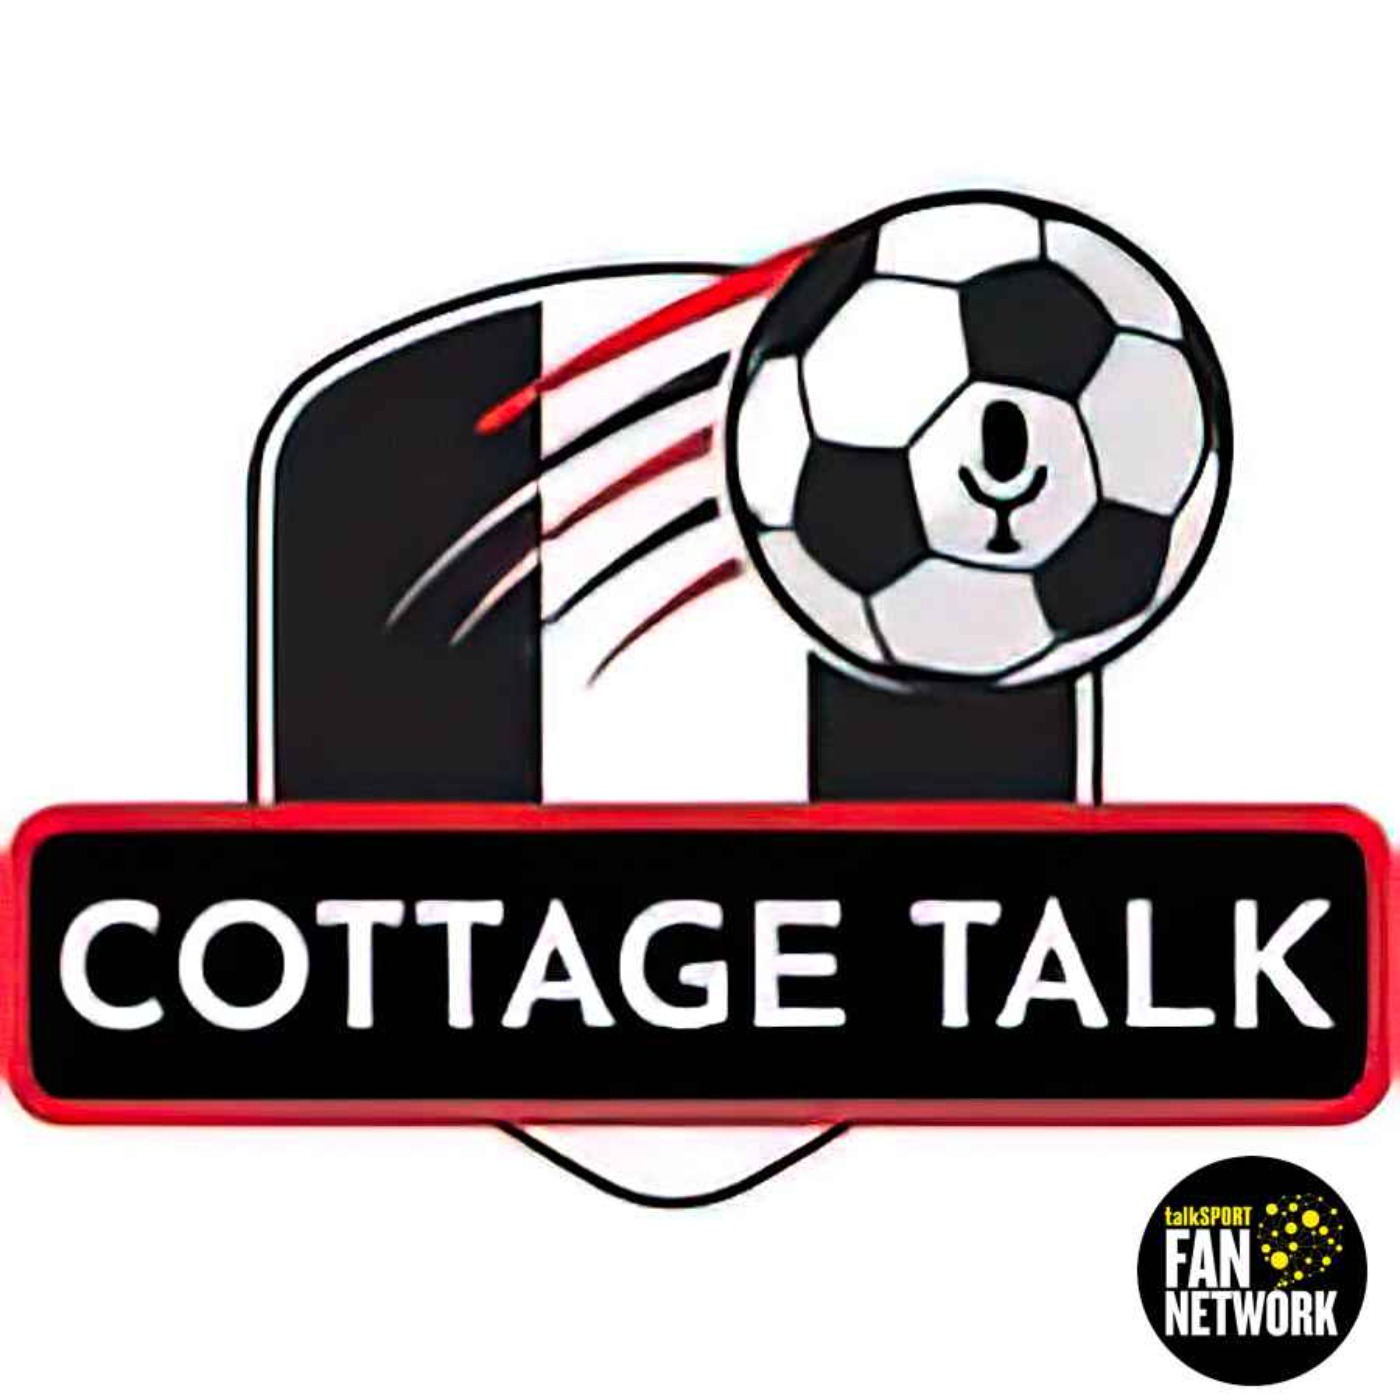 Cottage Talk Post Match Show: Fulham's 1-0 Loss To Newcastle United